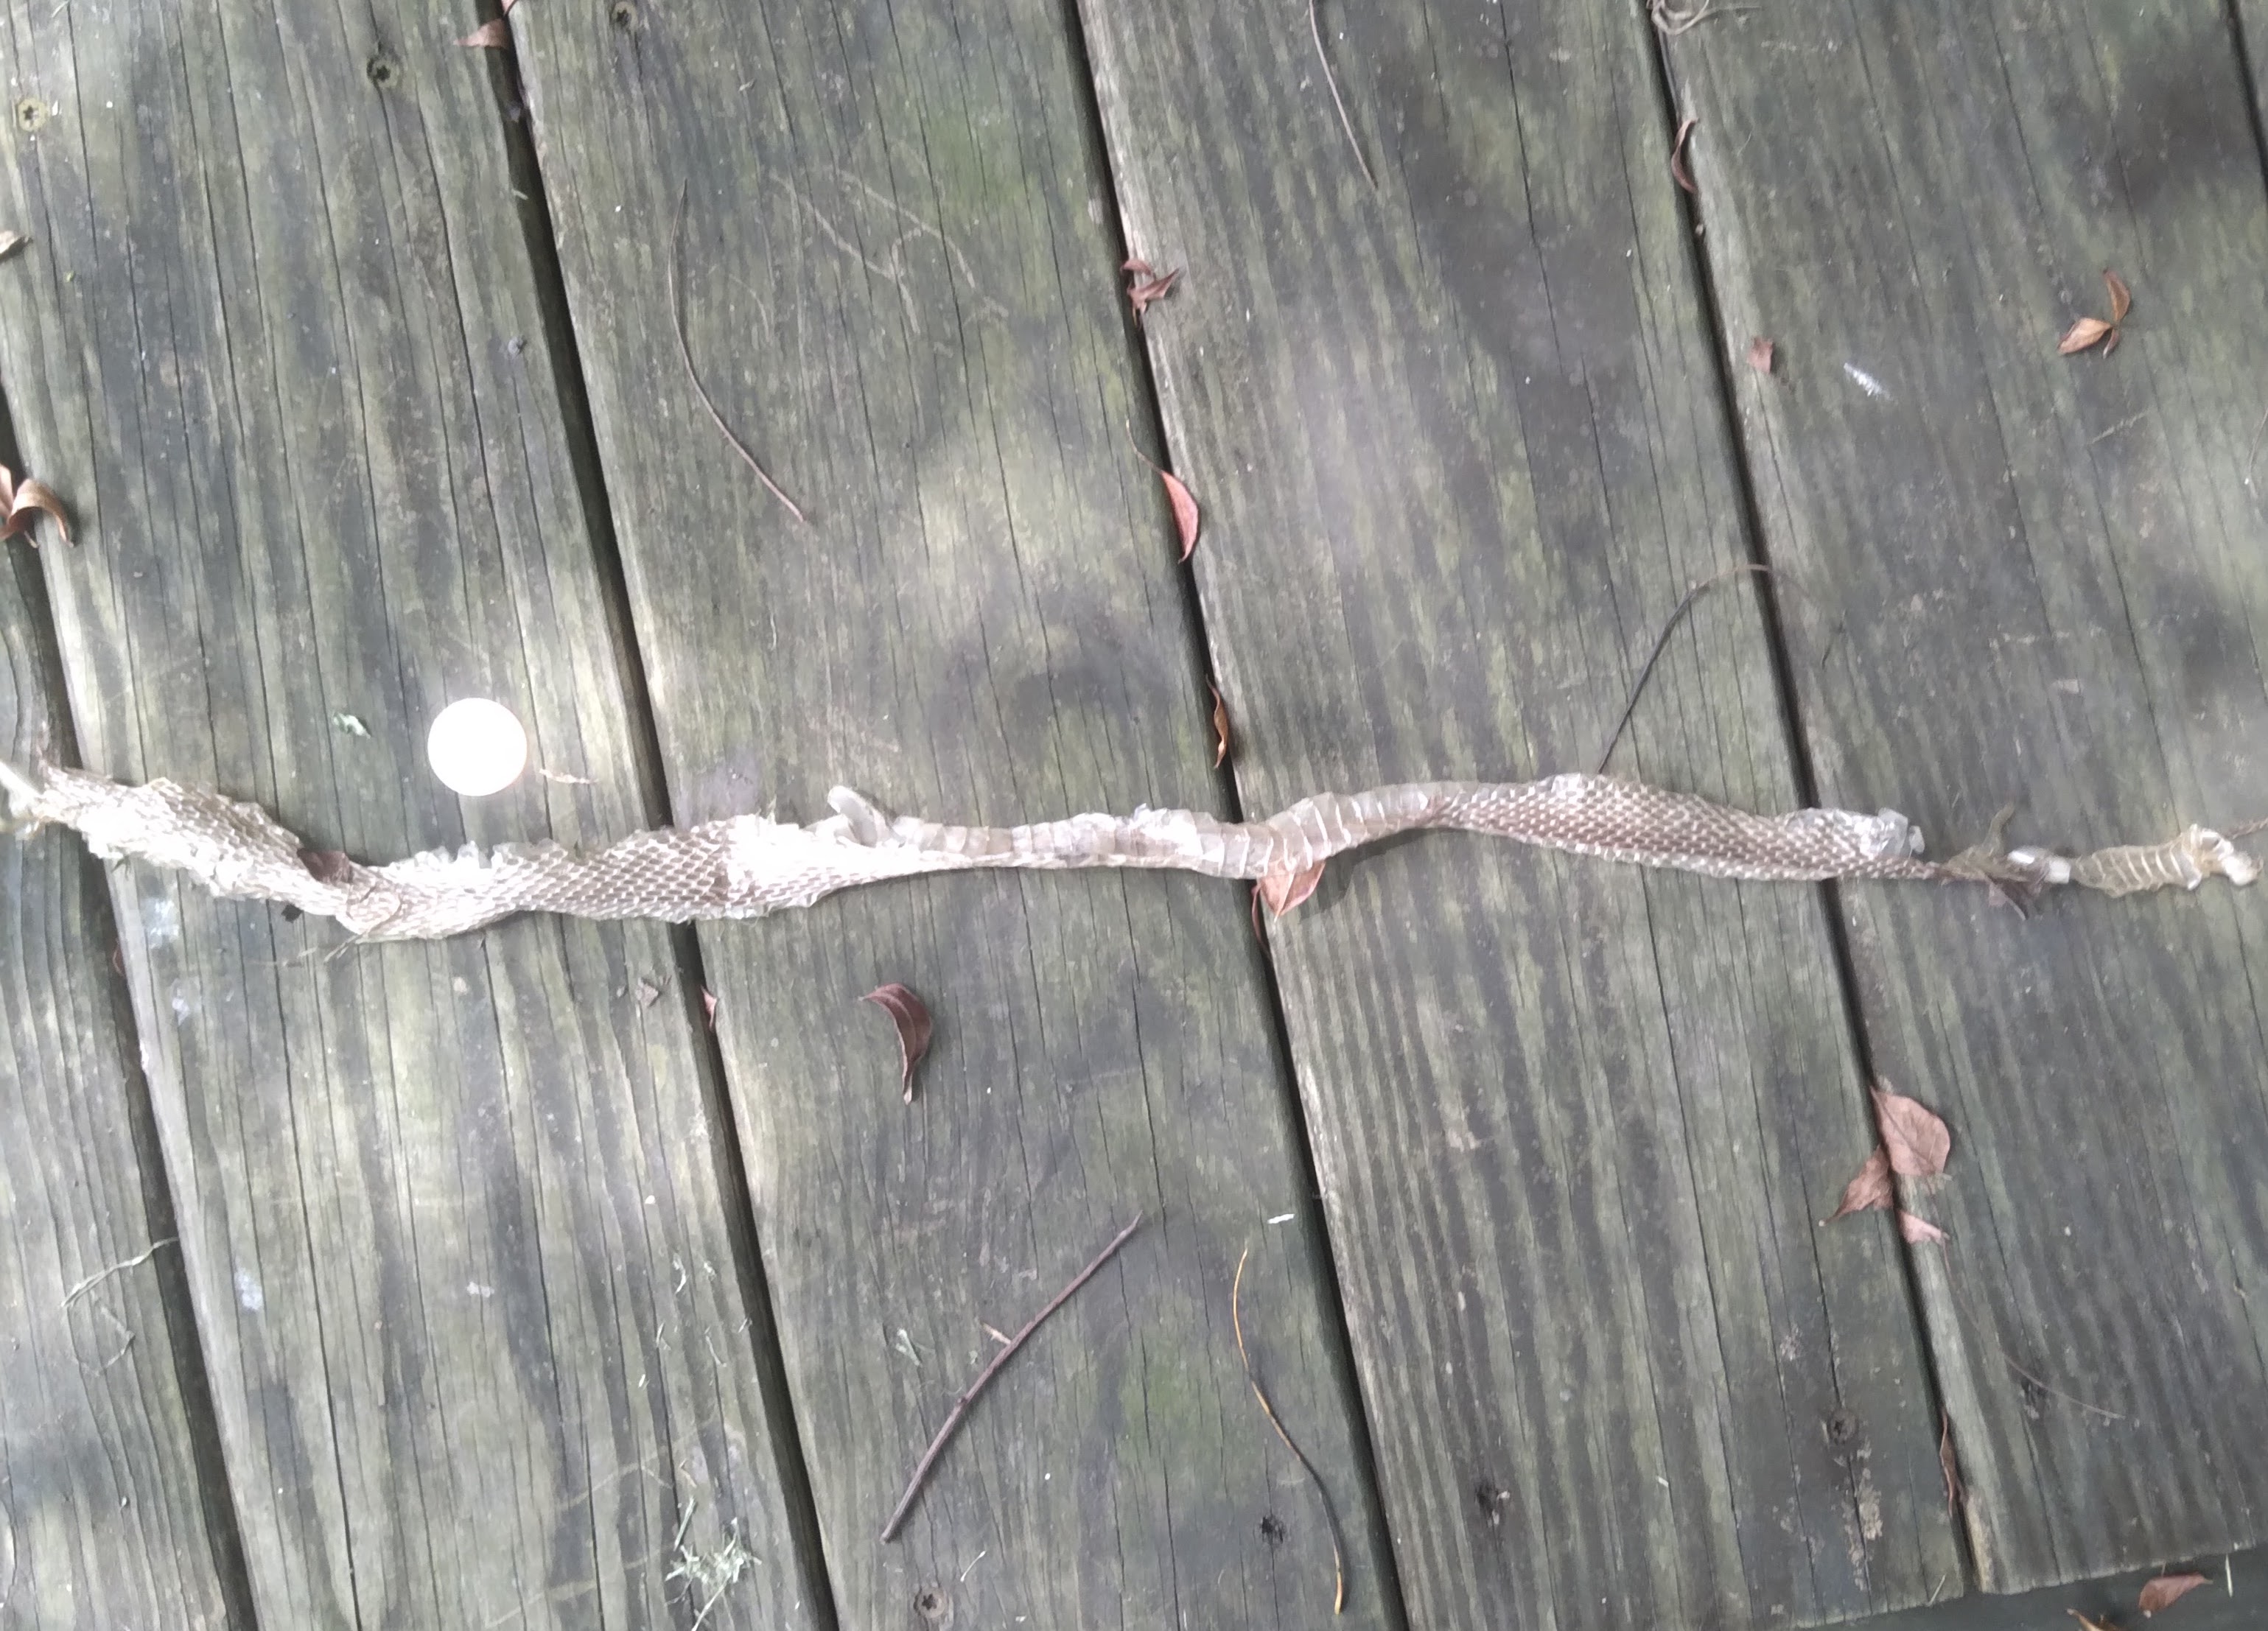 I found a shed snake skin in my fire pit.